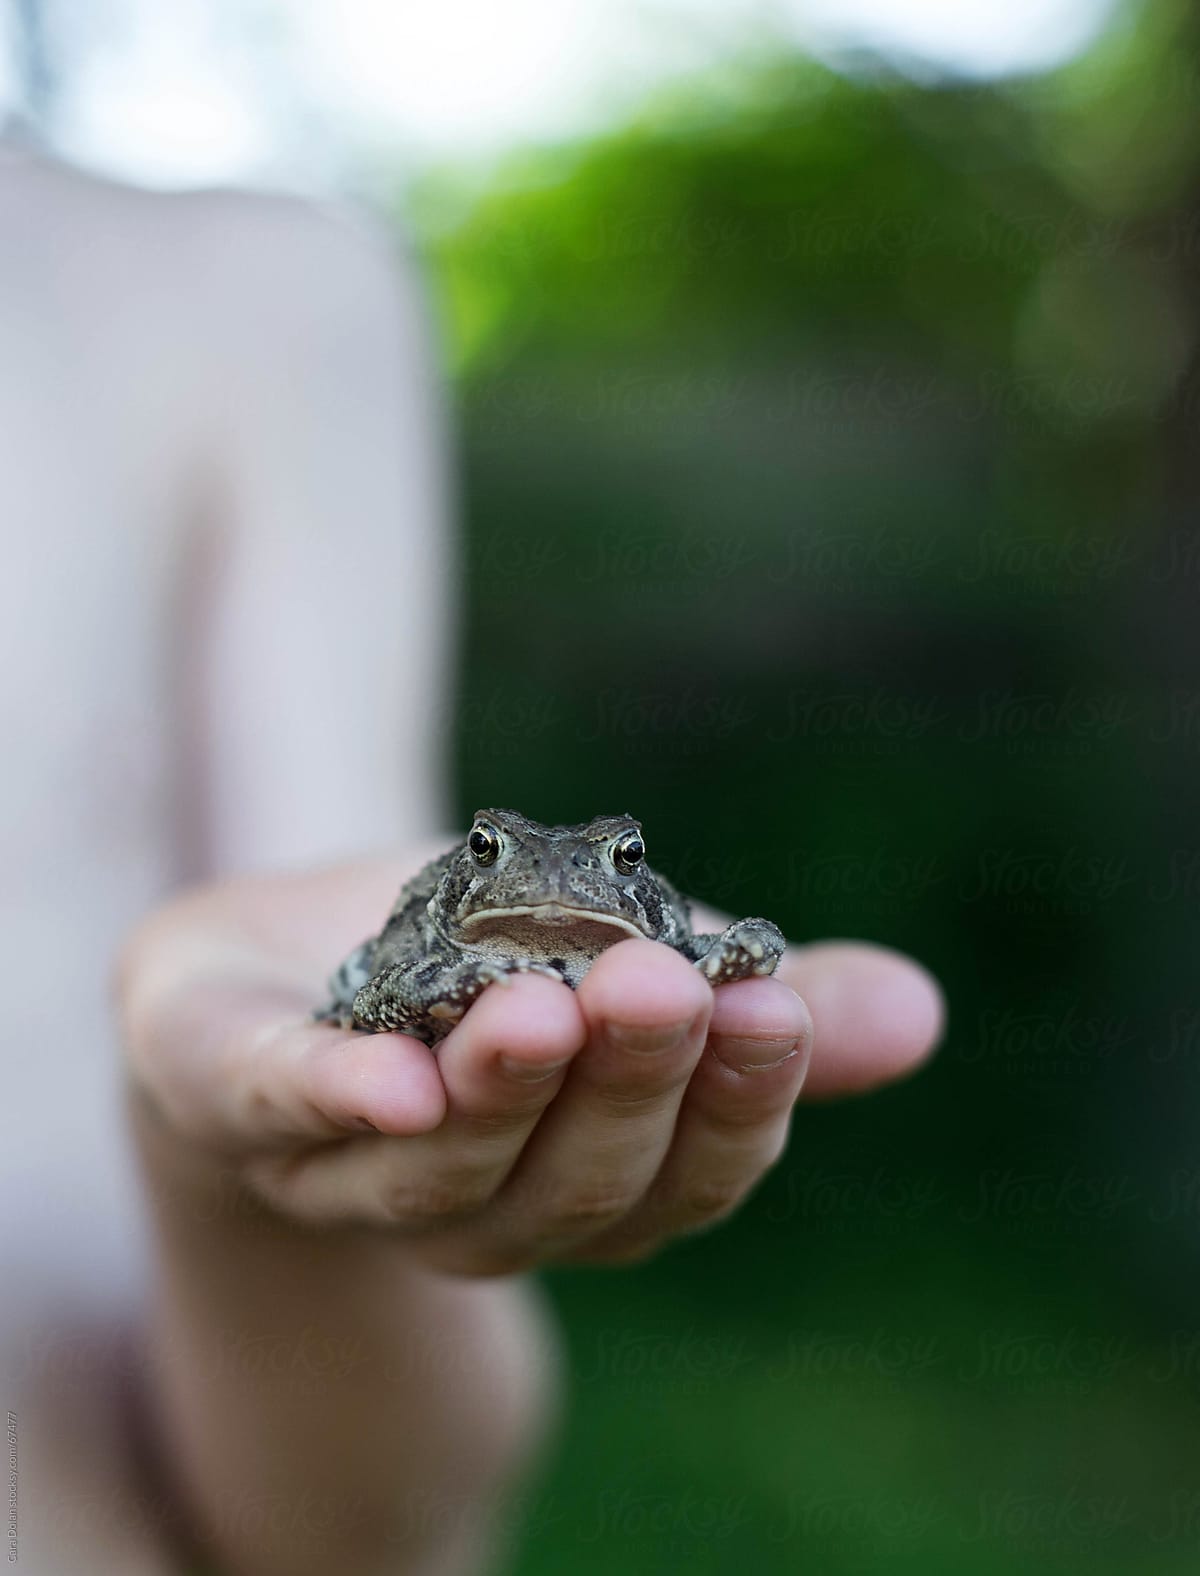 Child holds caught toad in the palm of his hand